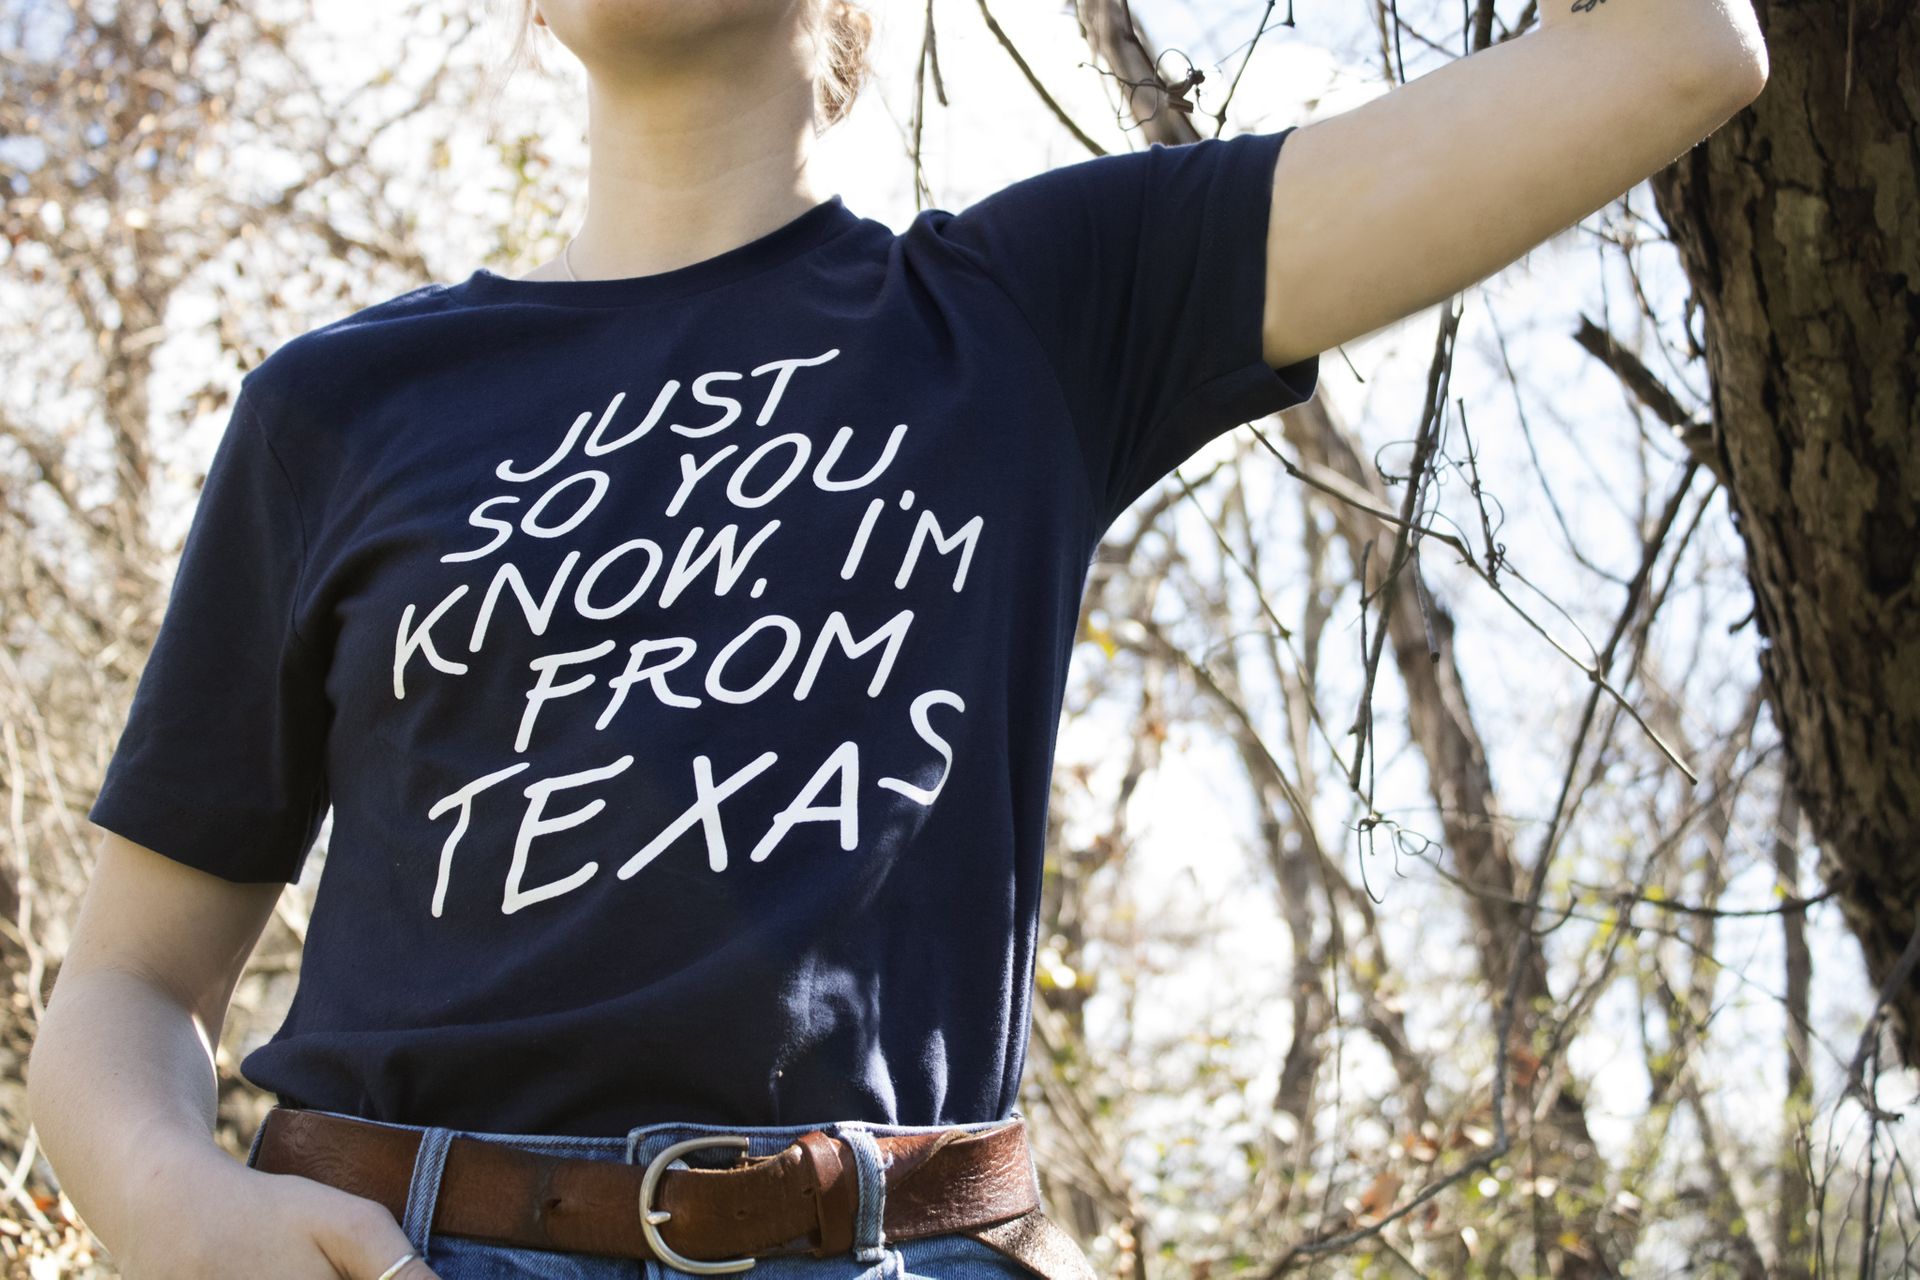 Just so you know I'm from Texas - Texas people, Texas state